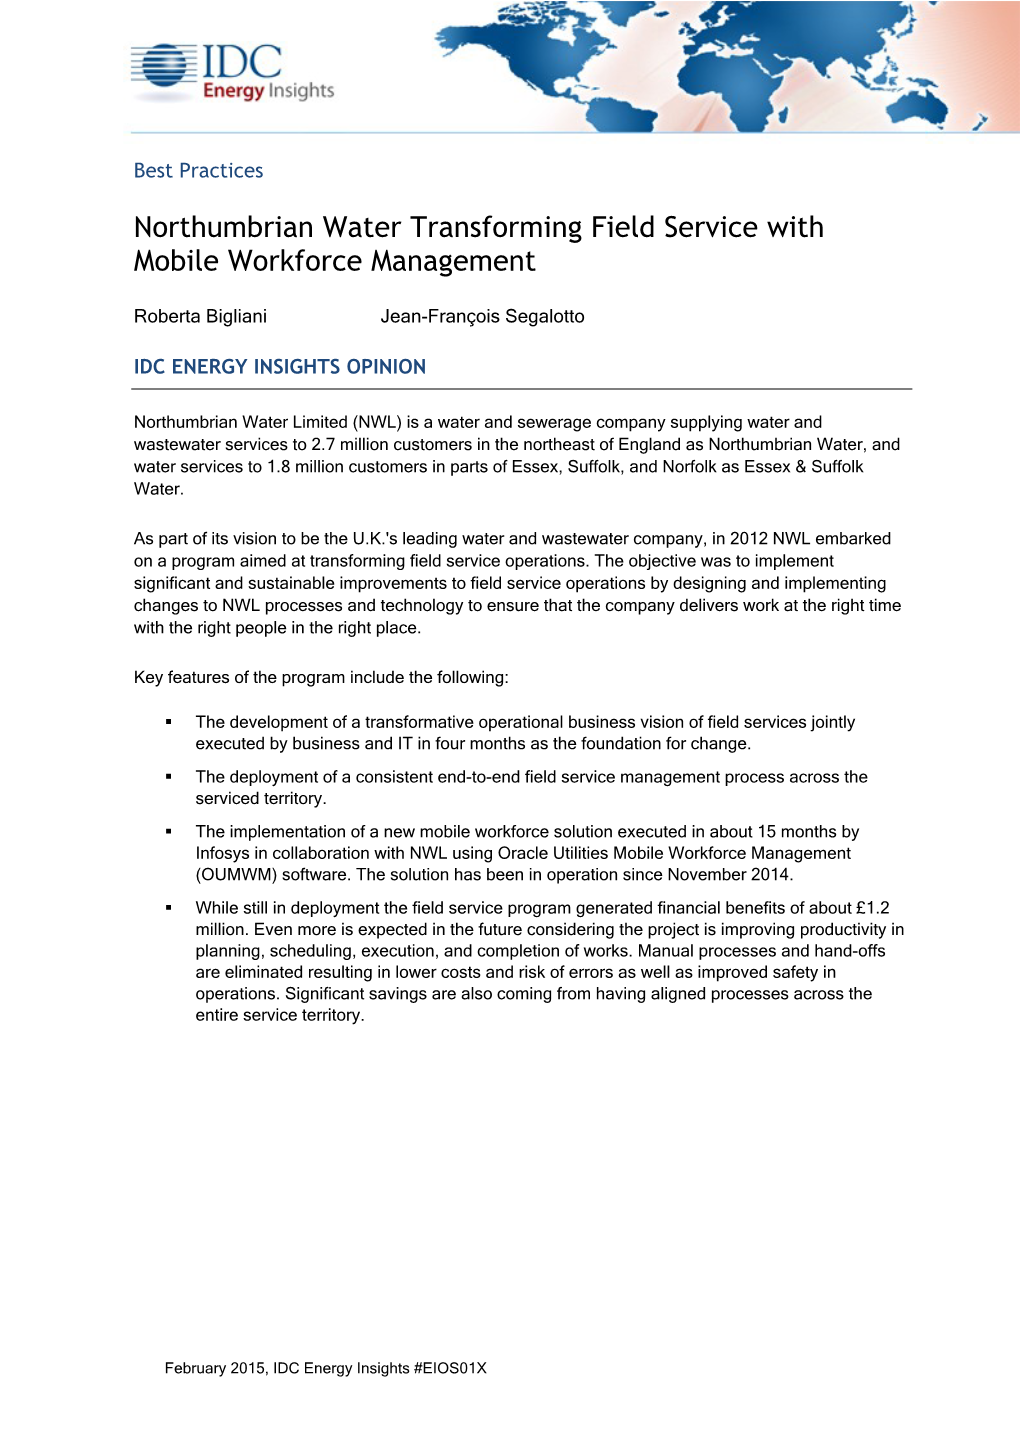 Northumbrian Water Transforming Field Service with Mobile Workforce Management